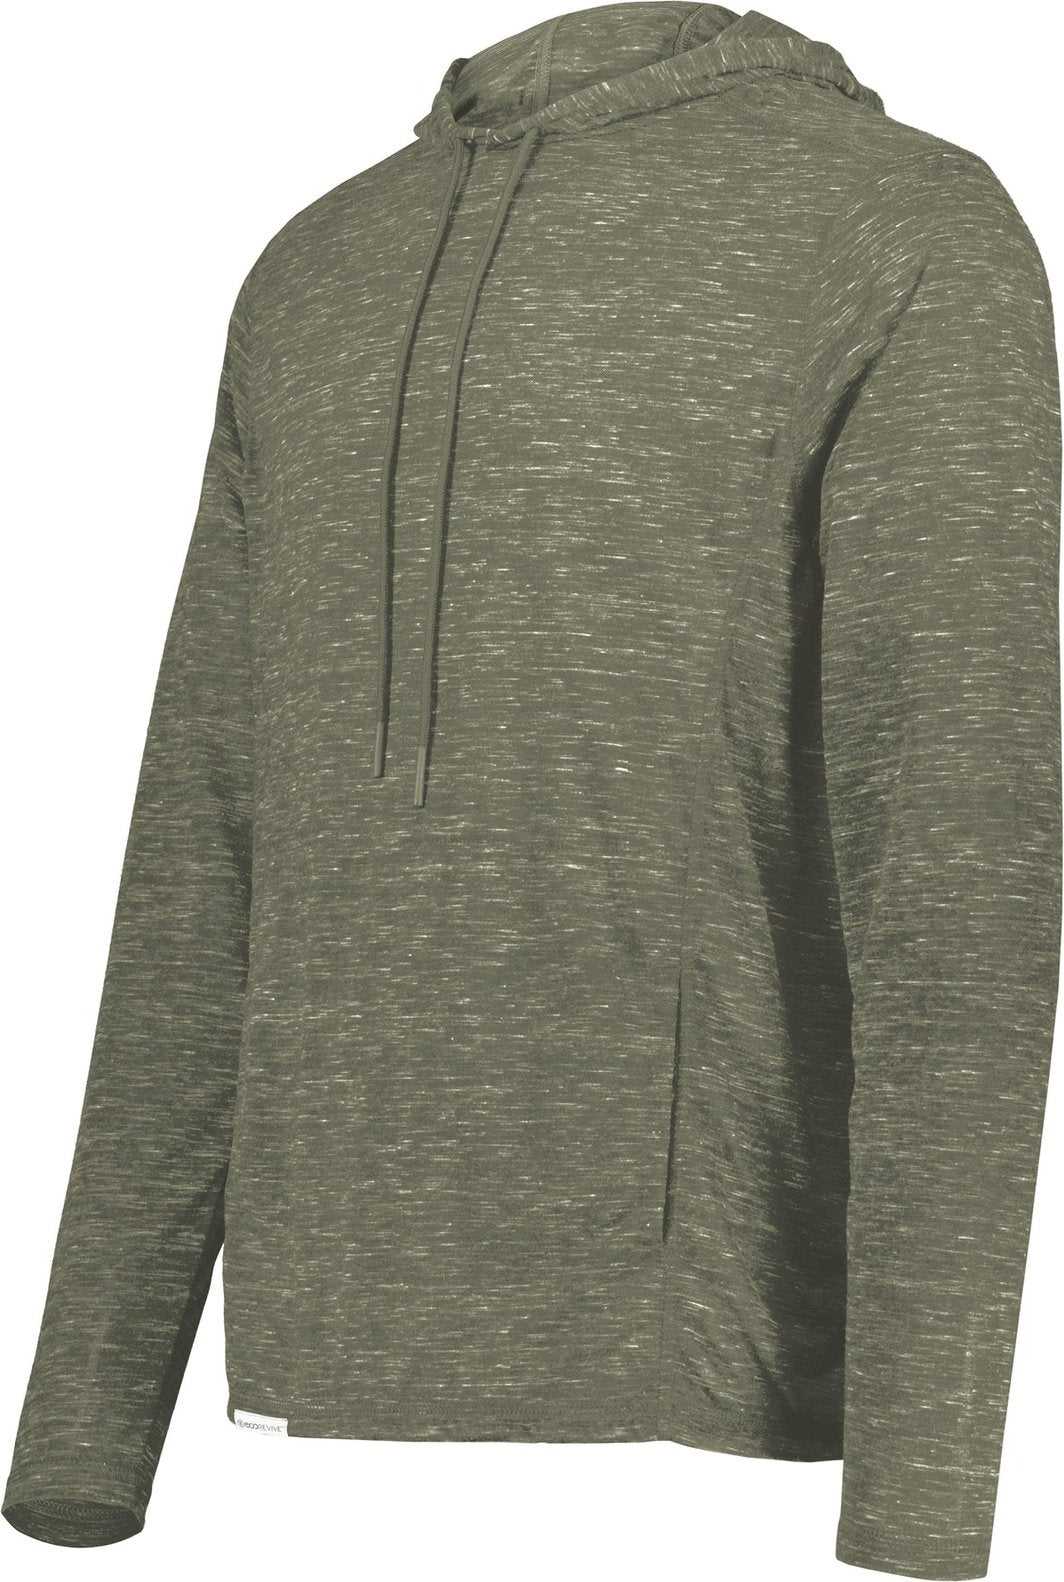 Holloway 222745 Monterey Hoodie - Olive Heather - HIT a Double